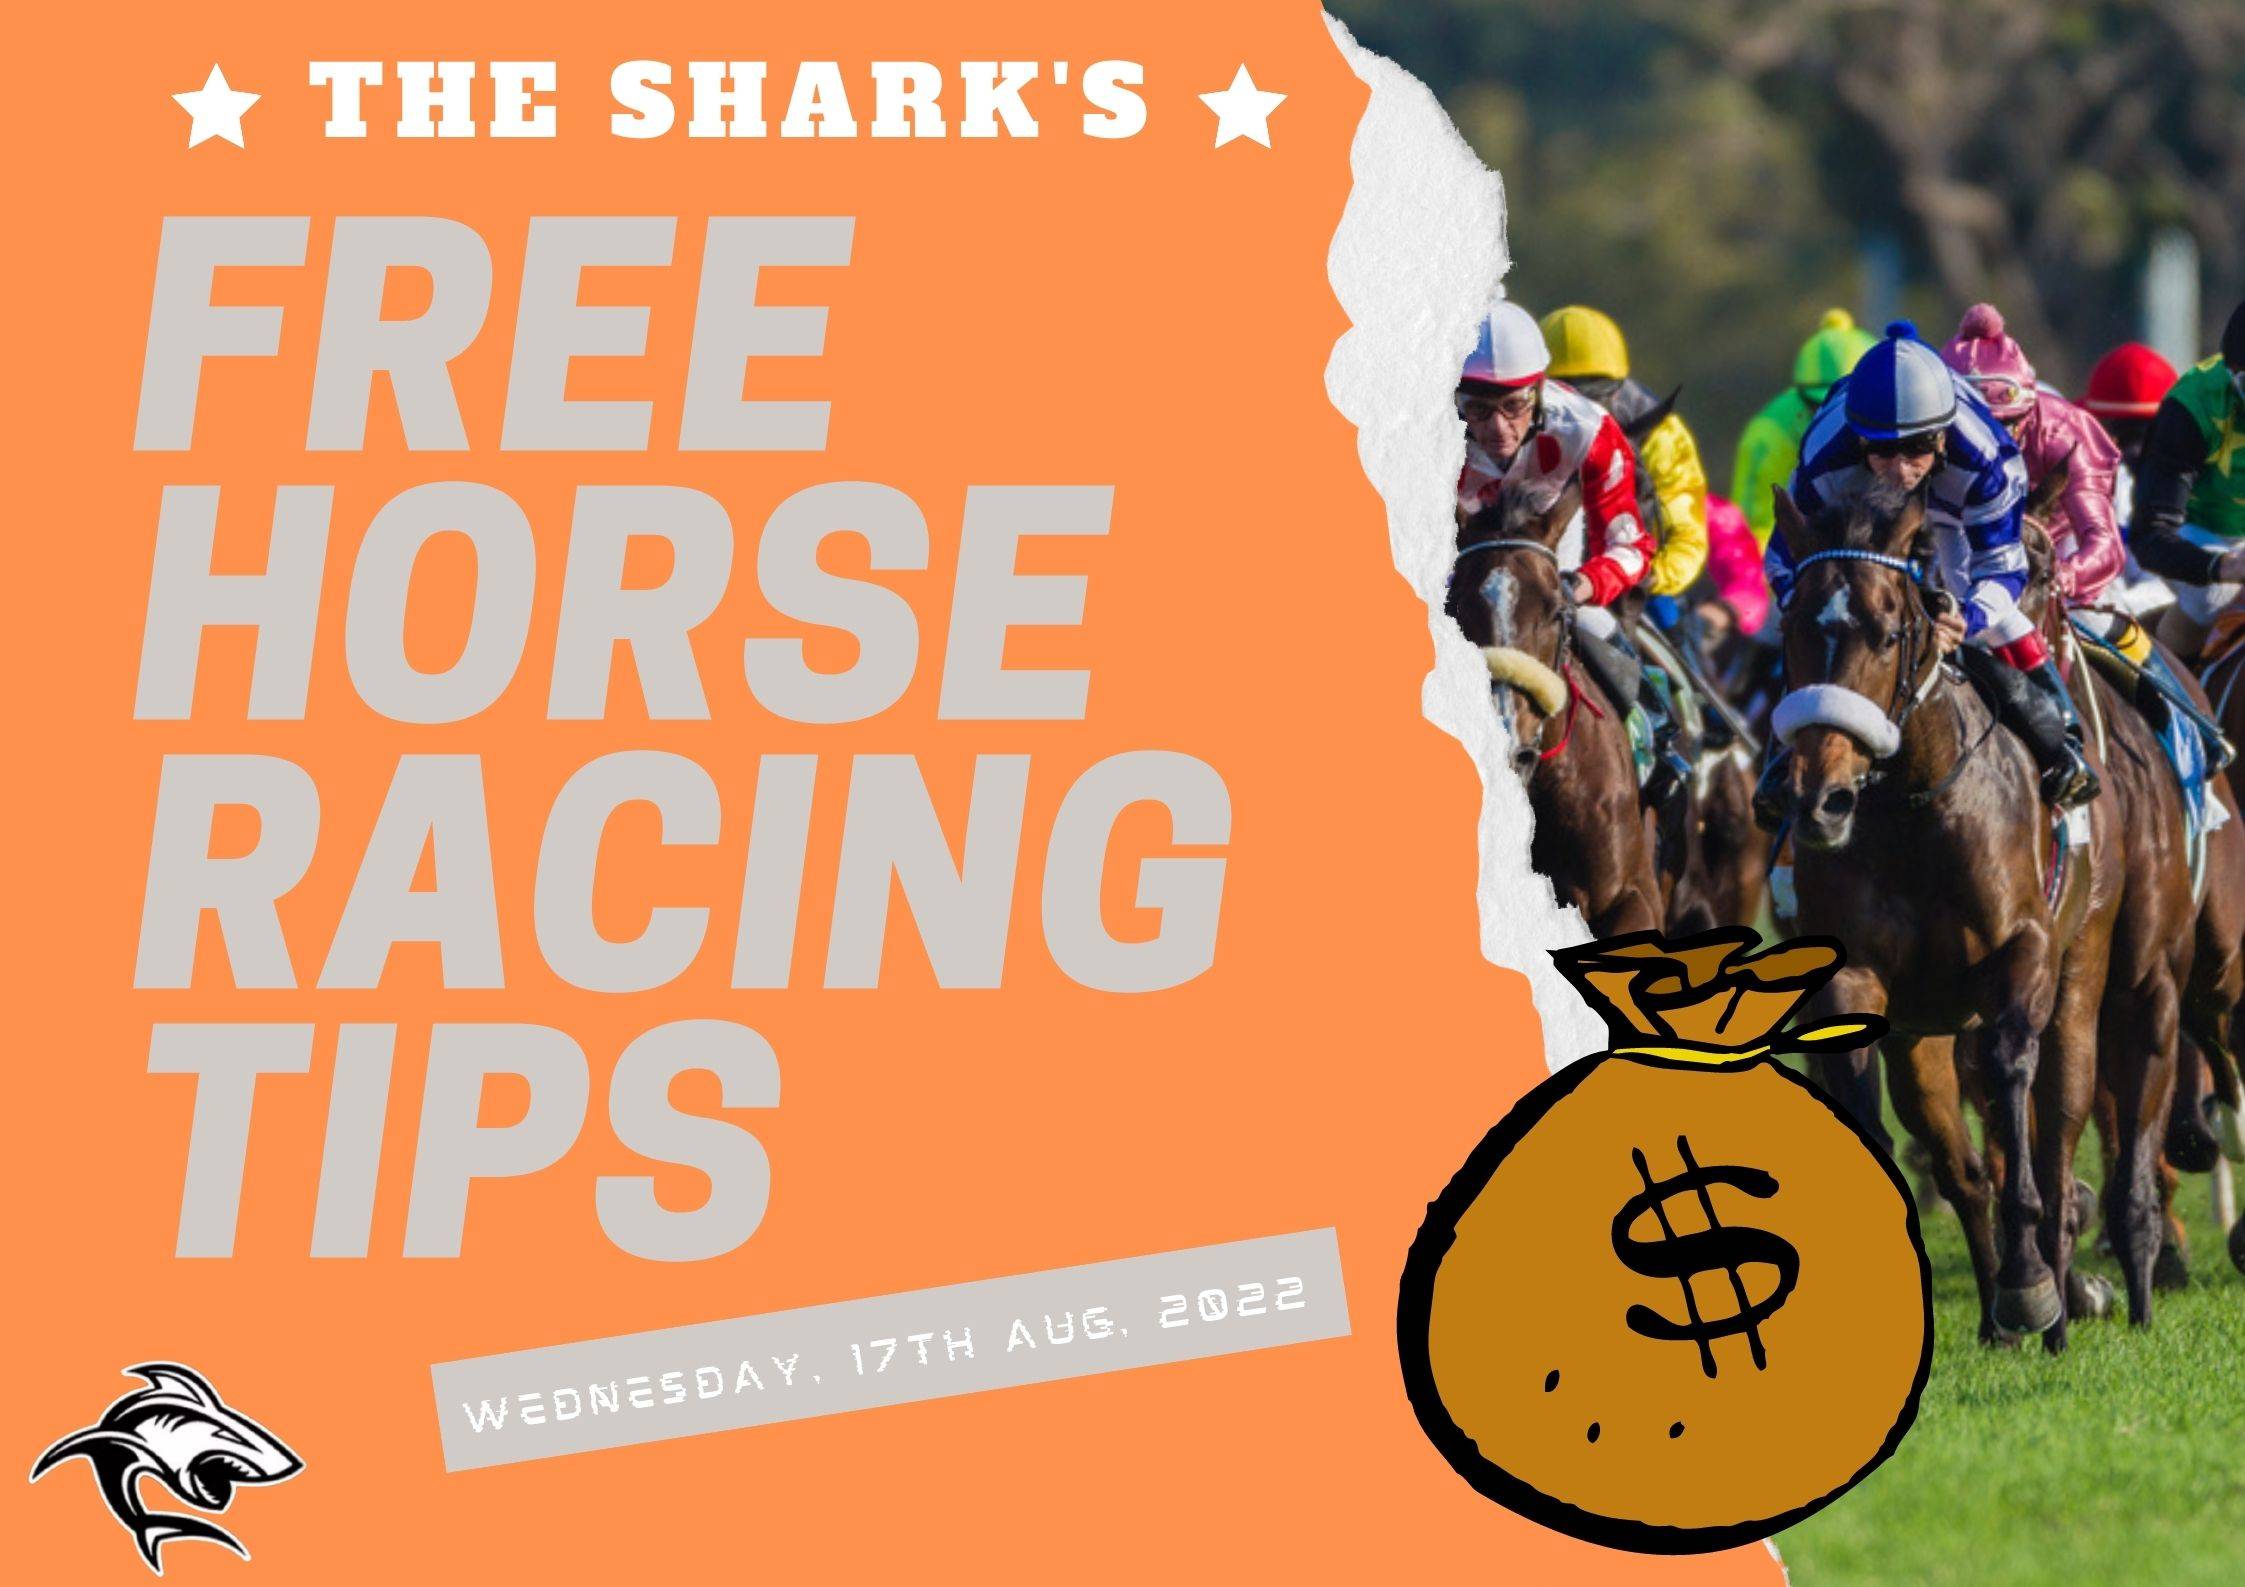 Free Horse Racing Tips - 17th Aug